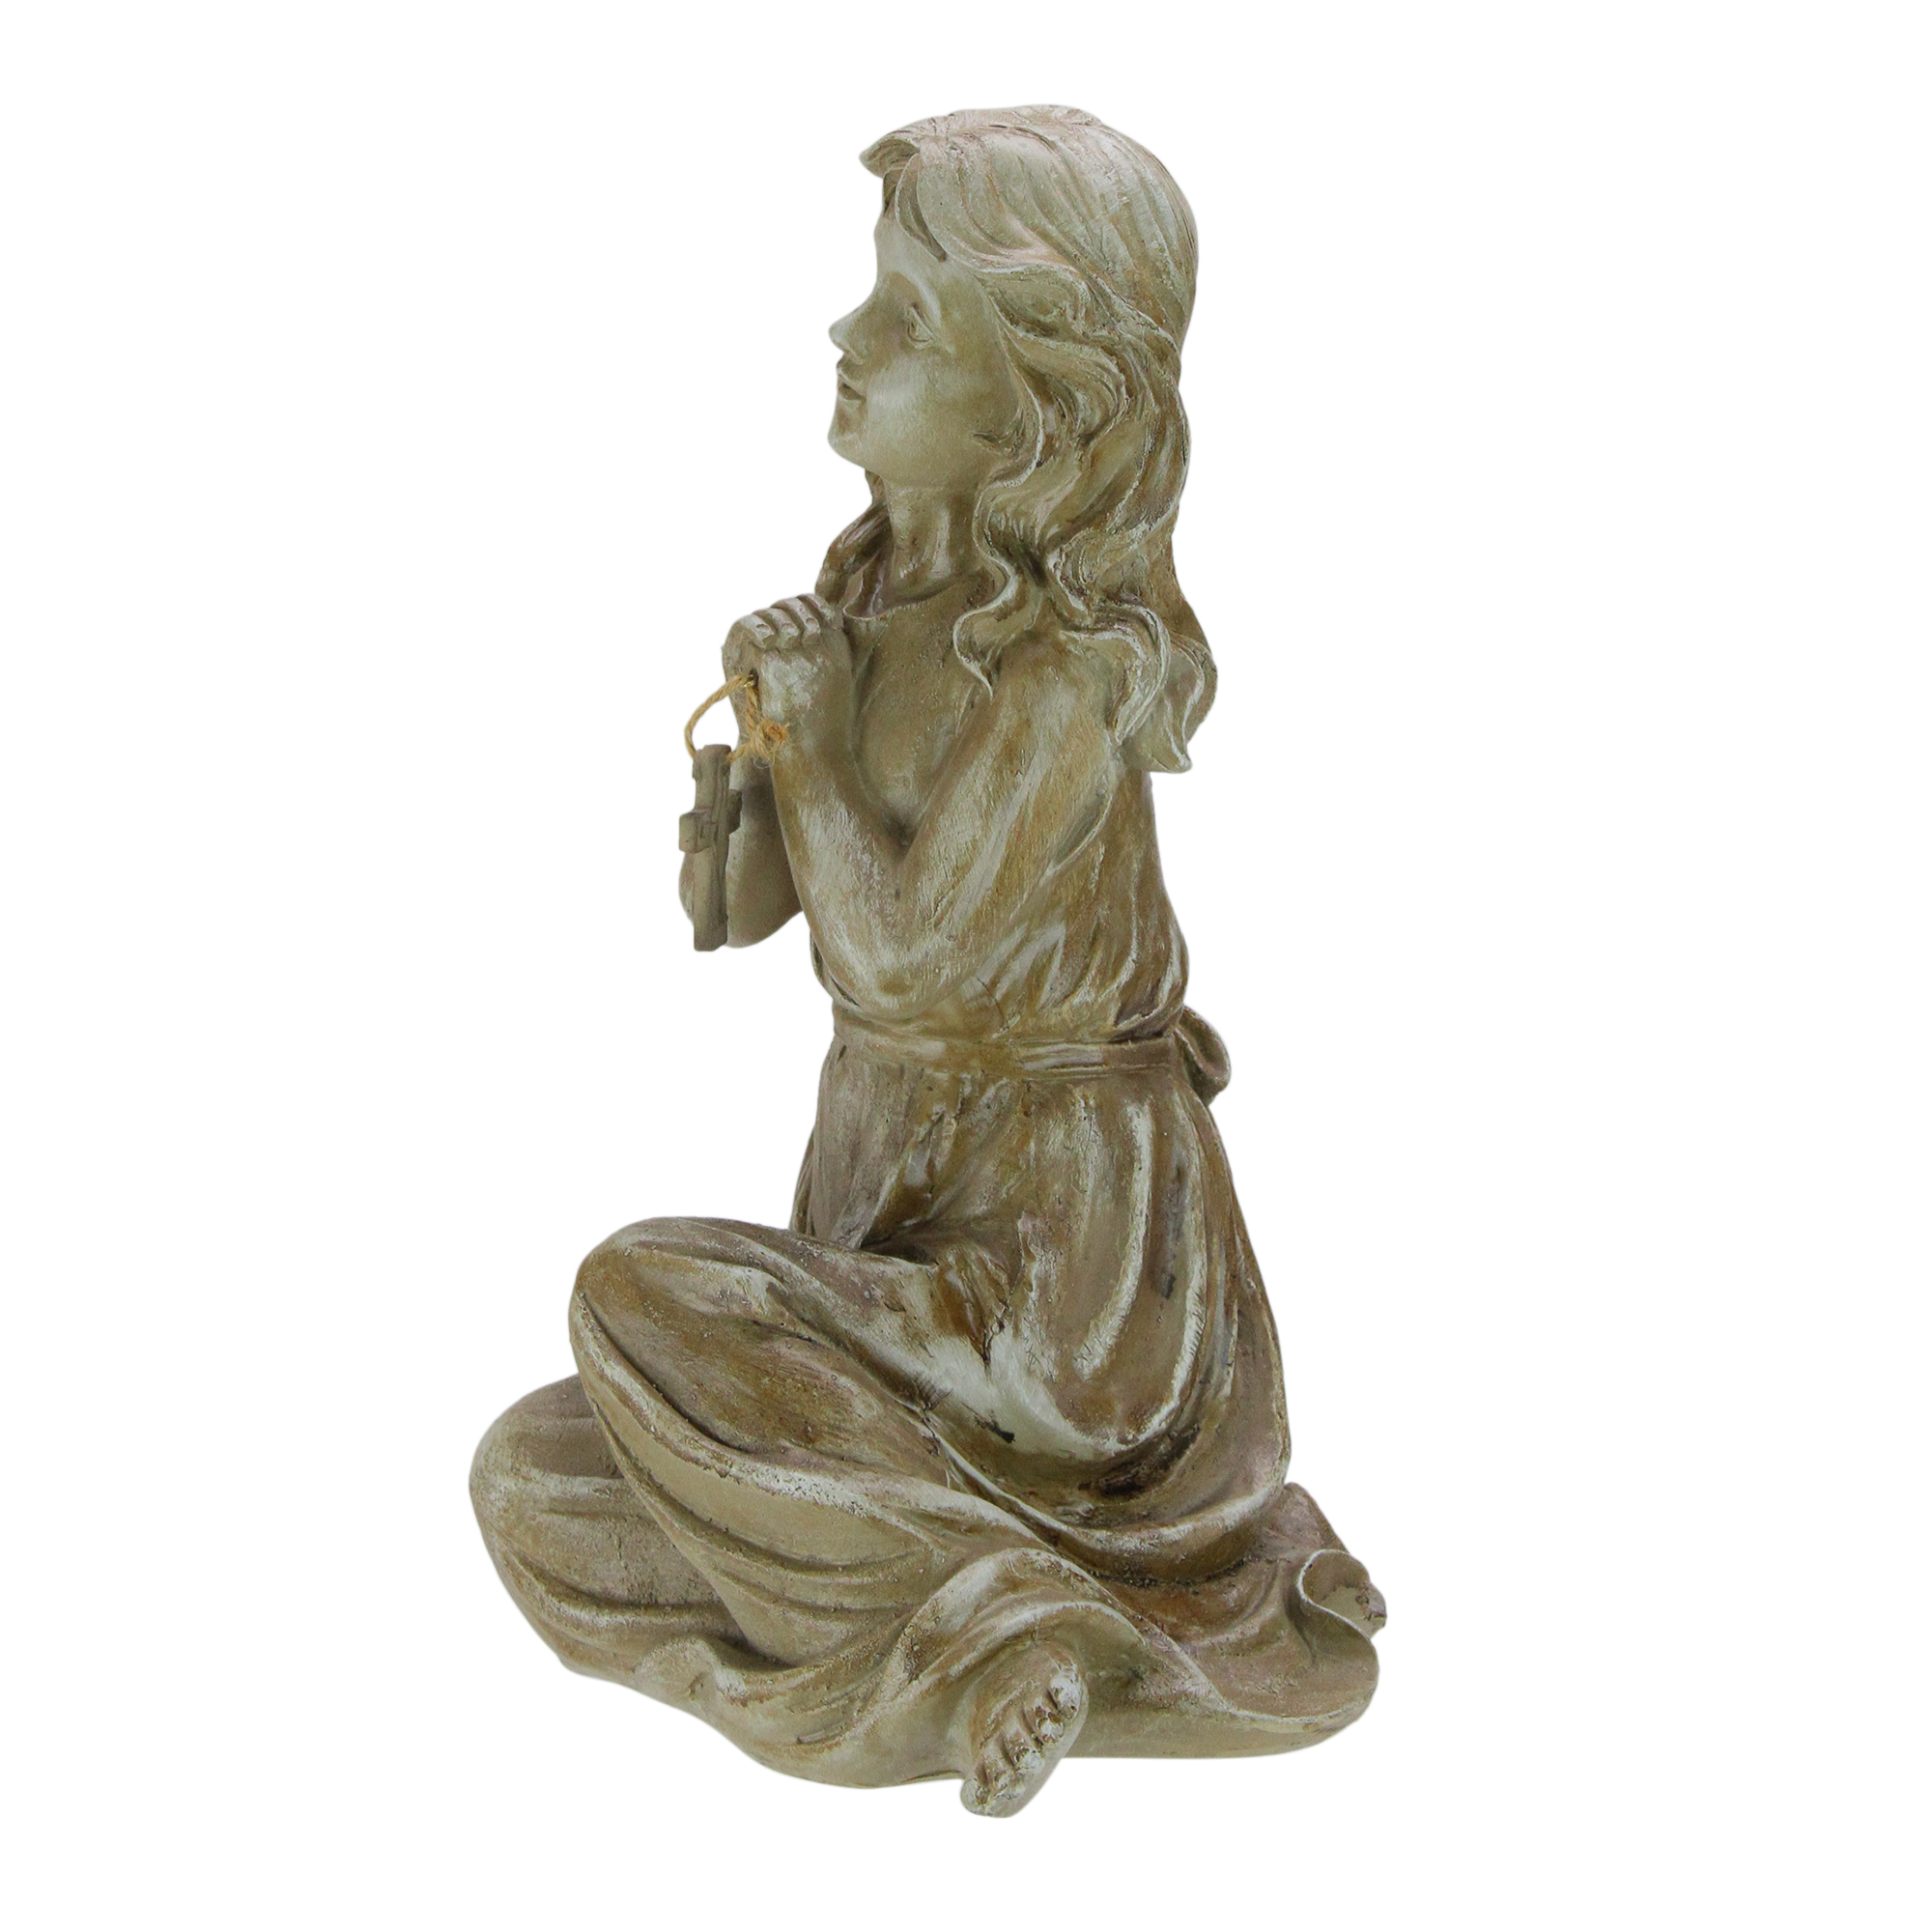 Northlight 14.5" Sitting Angel with Cross Garden Statue Outdoor Decoration - Brown - image 2 of 3